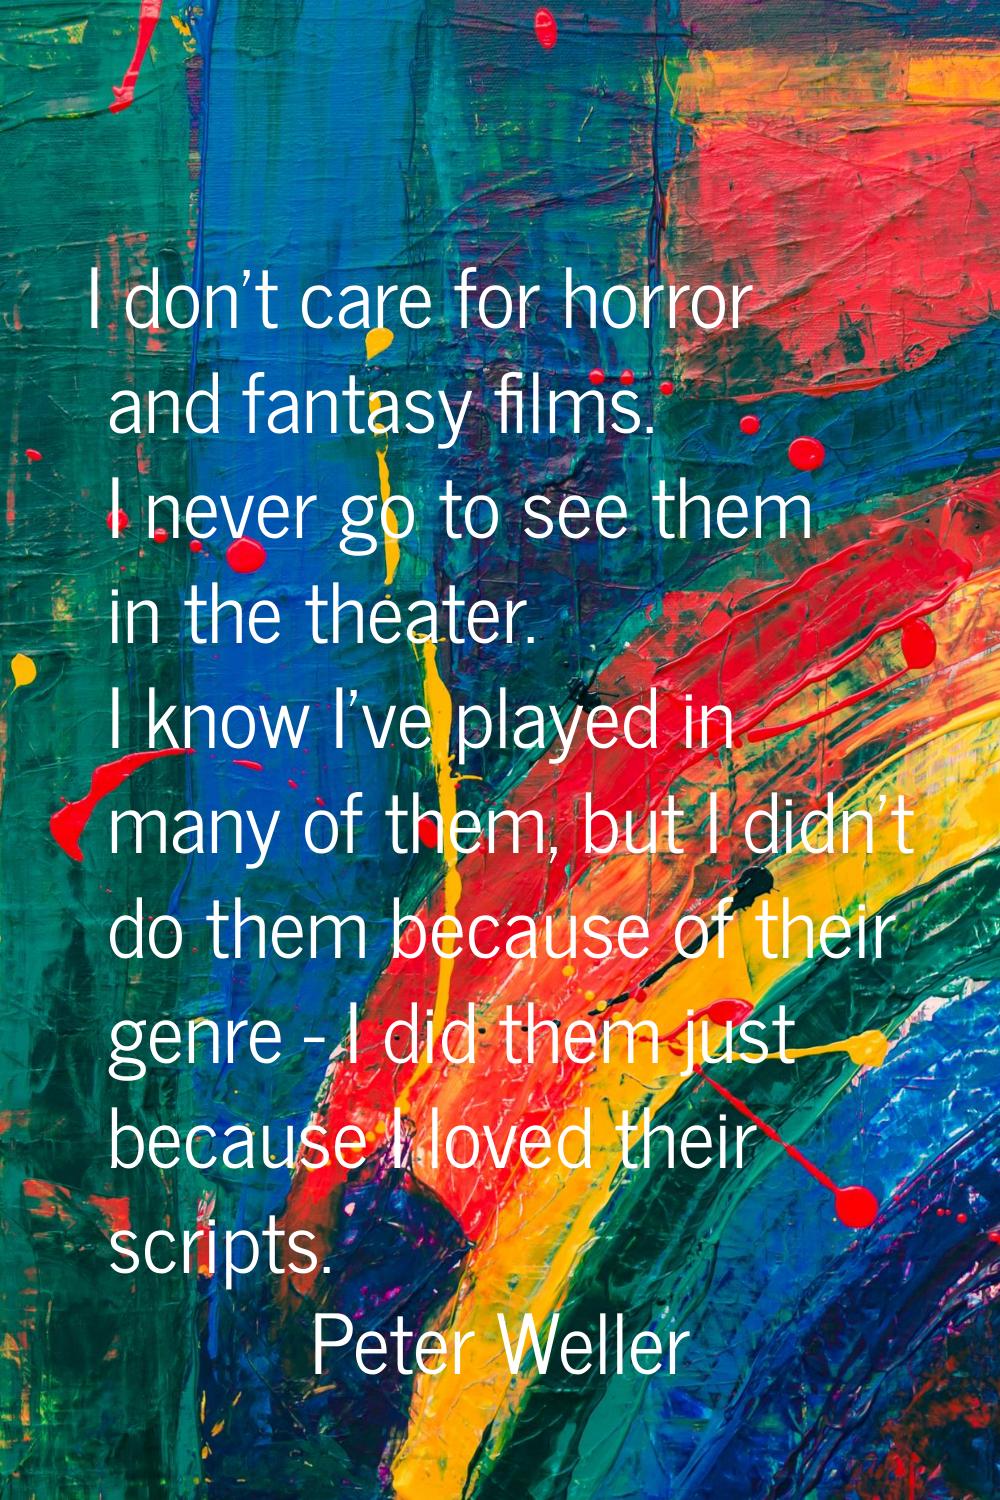 I don't care for horror and fantasy films. I never go to see them in the theater. I know I've playe